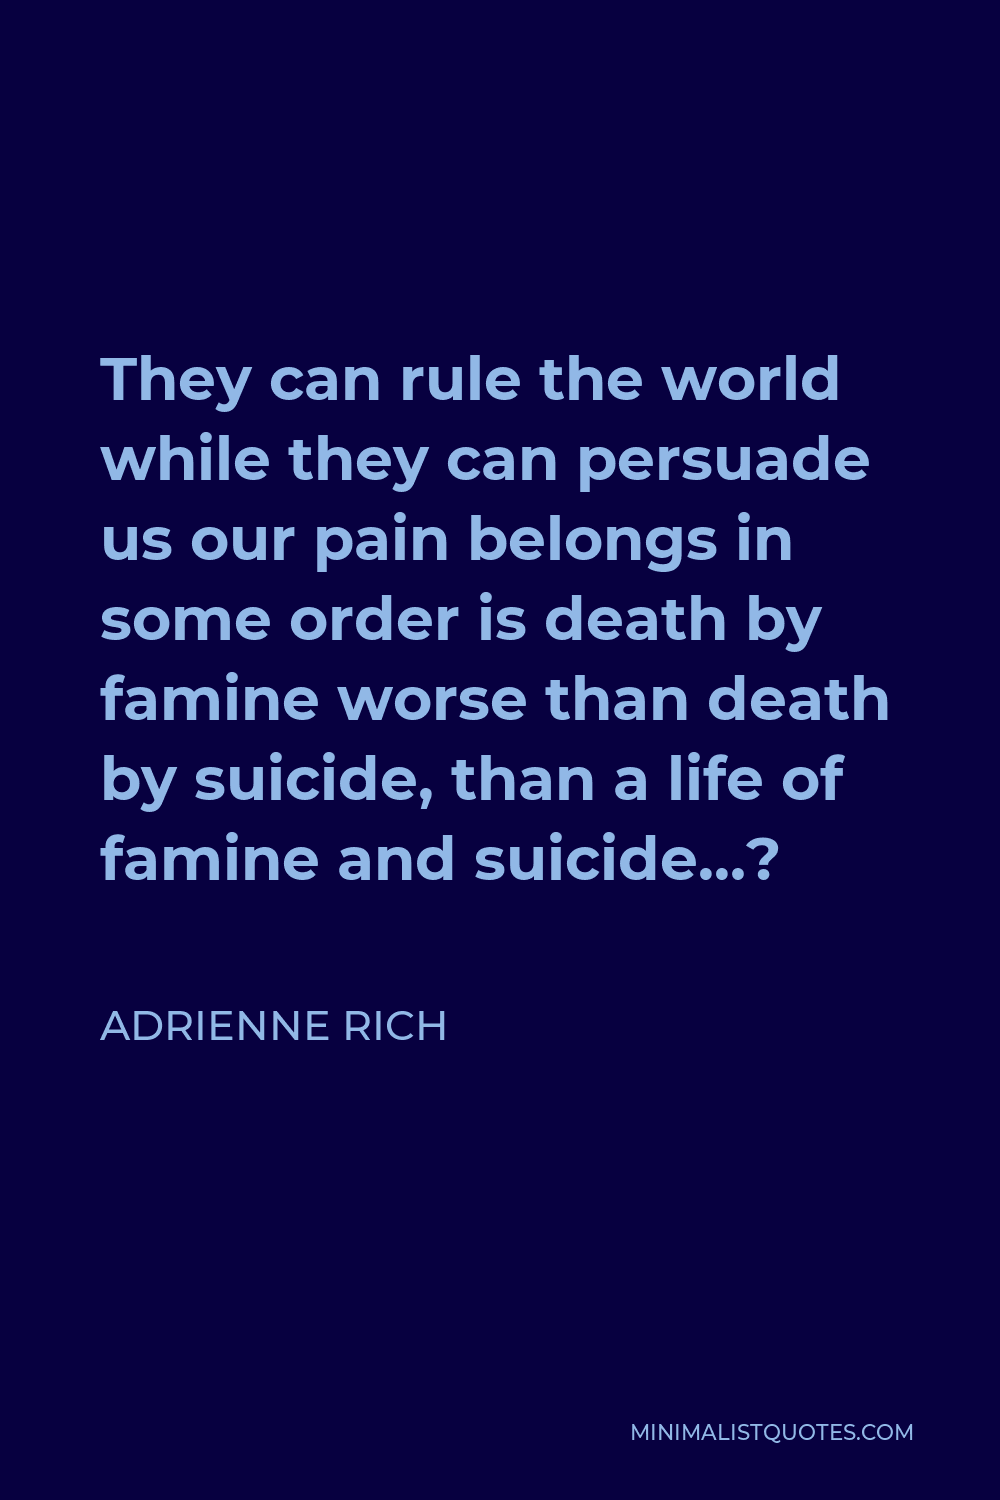 Adrienne Rich Quote - They can rule the world while they can persuade us our pain belongs in some order is death by famine worse than death by suicide, than a life of famine and suicide…?